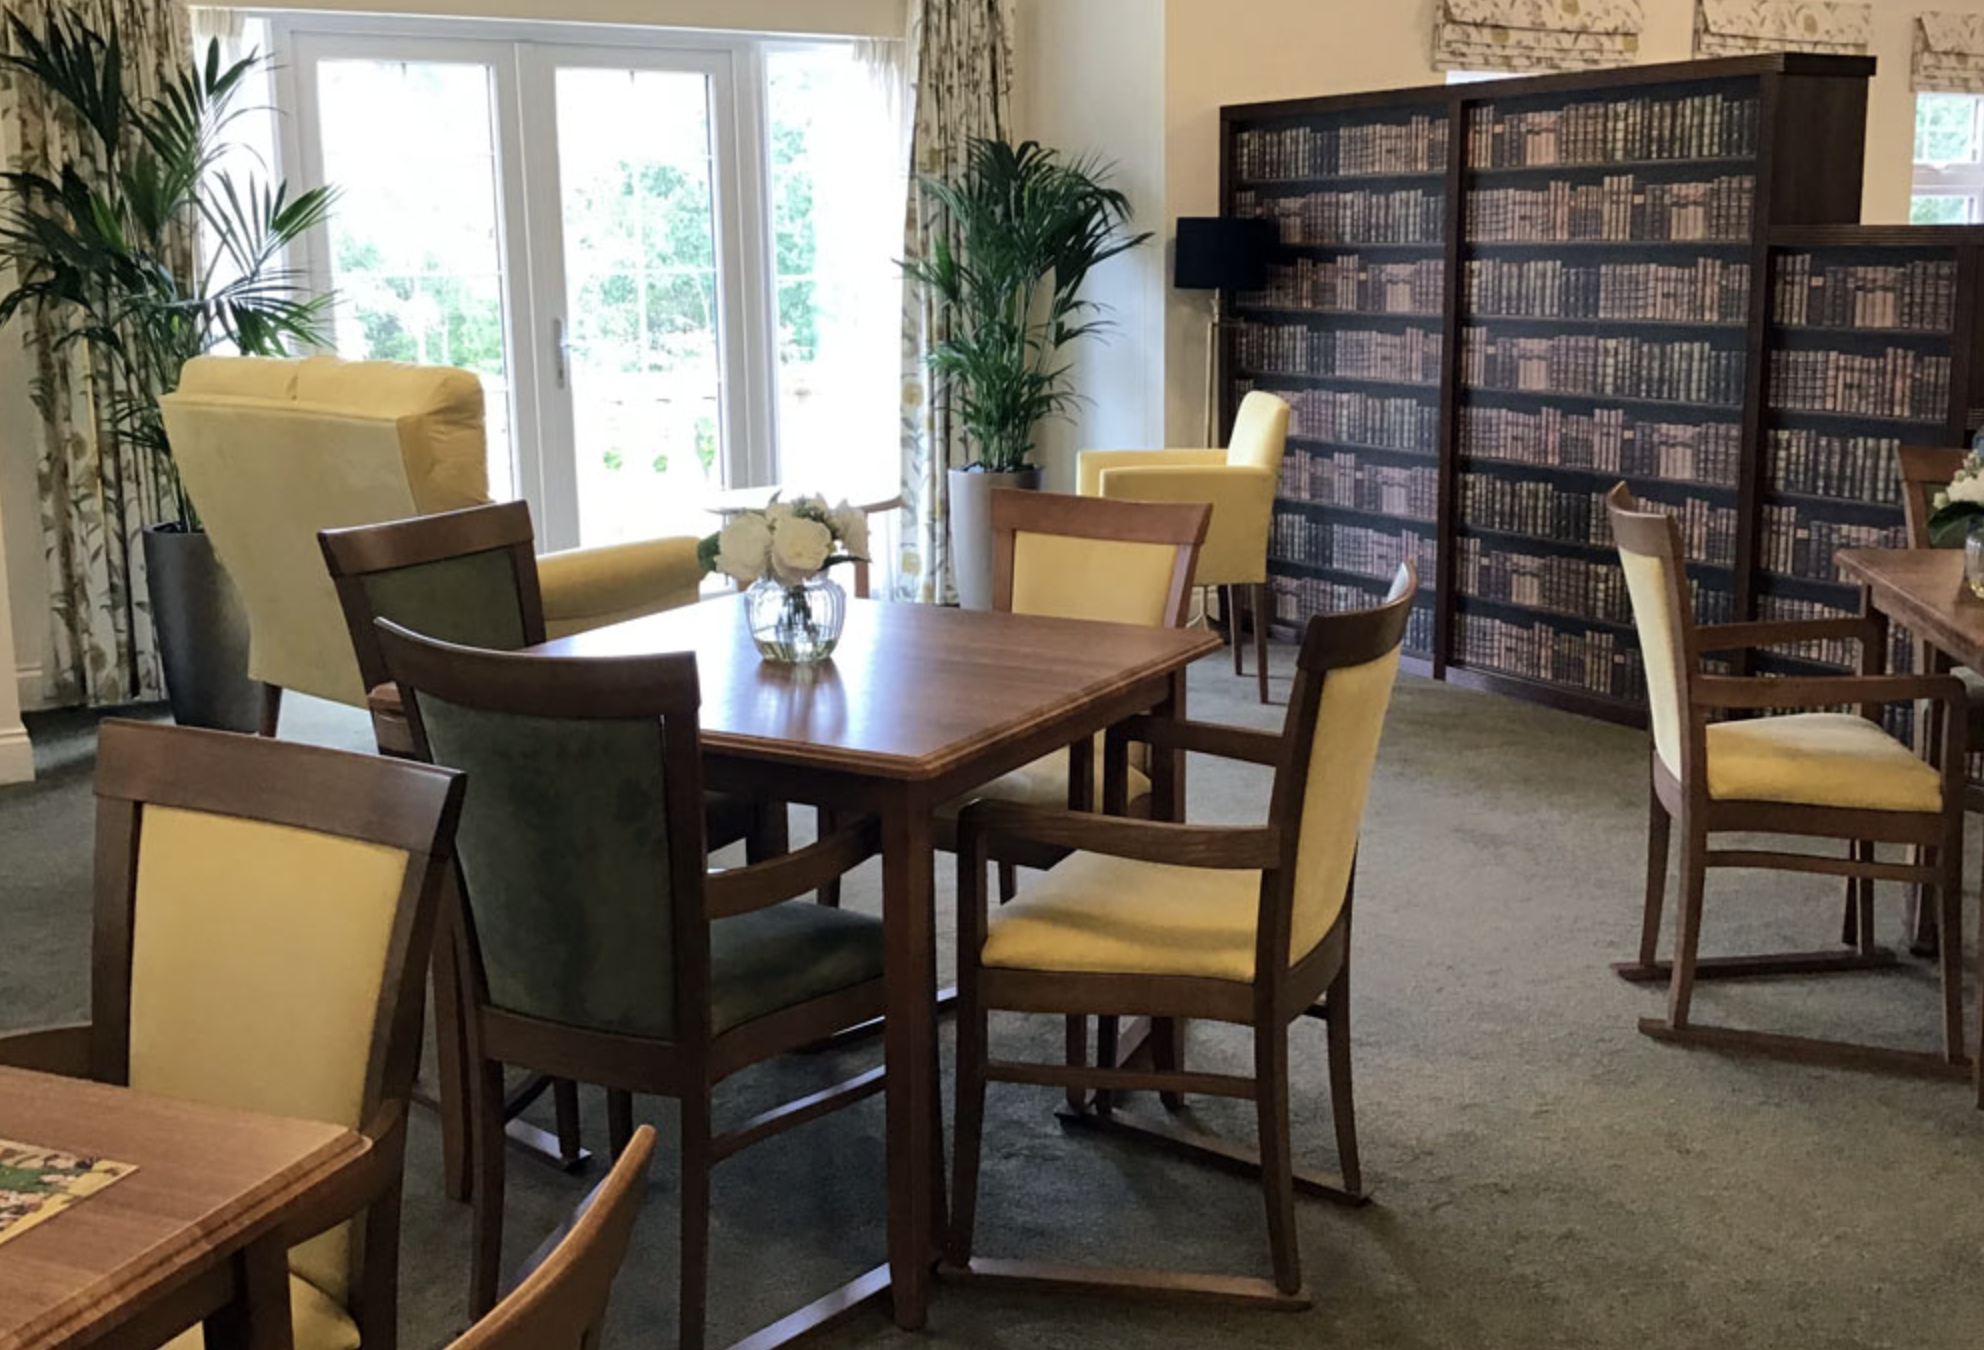 Dining area of St. Ives Country House care home in St Ives, Ringwood